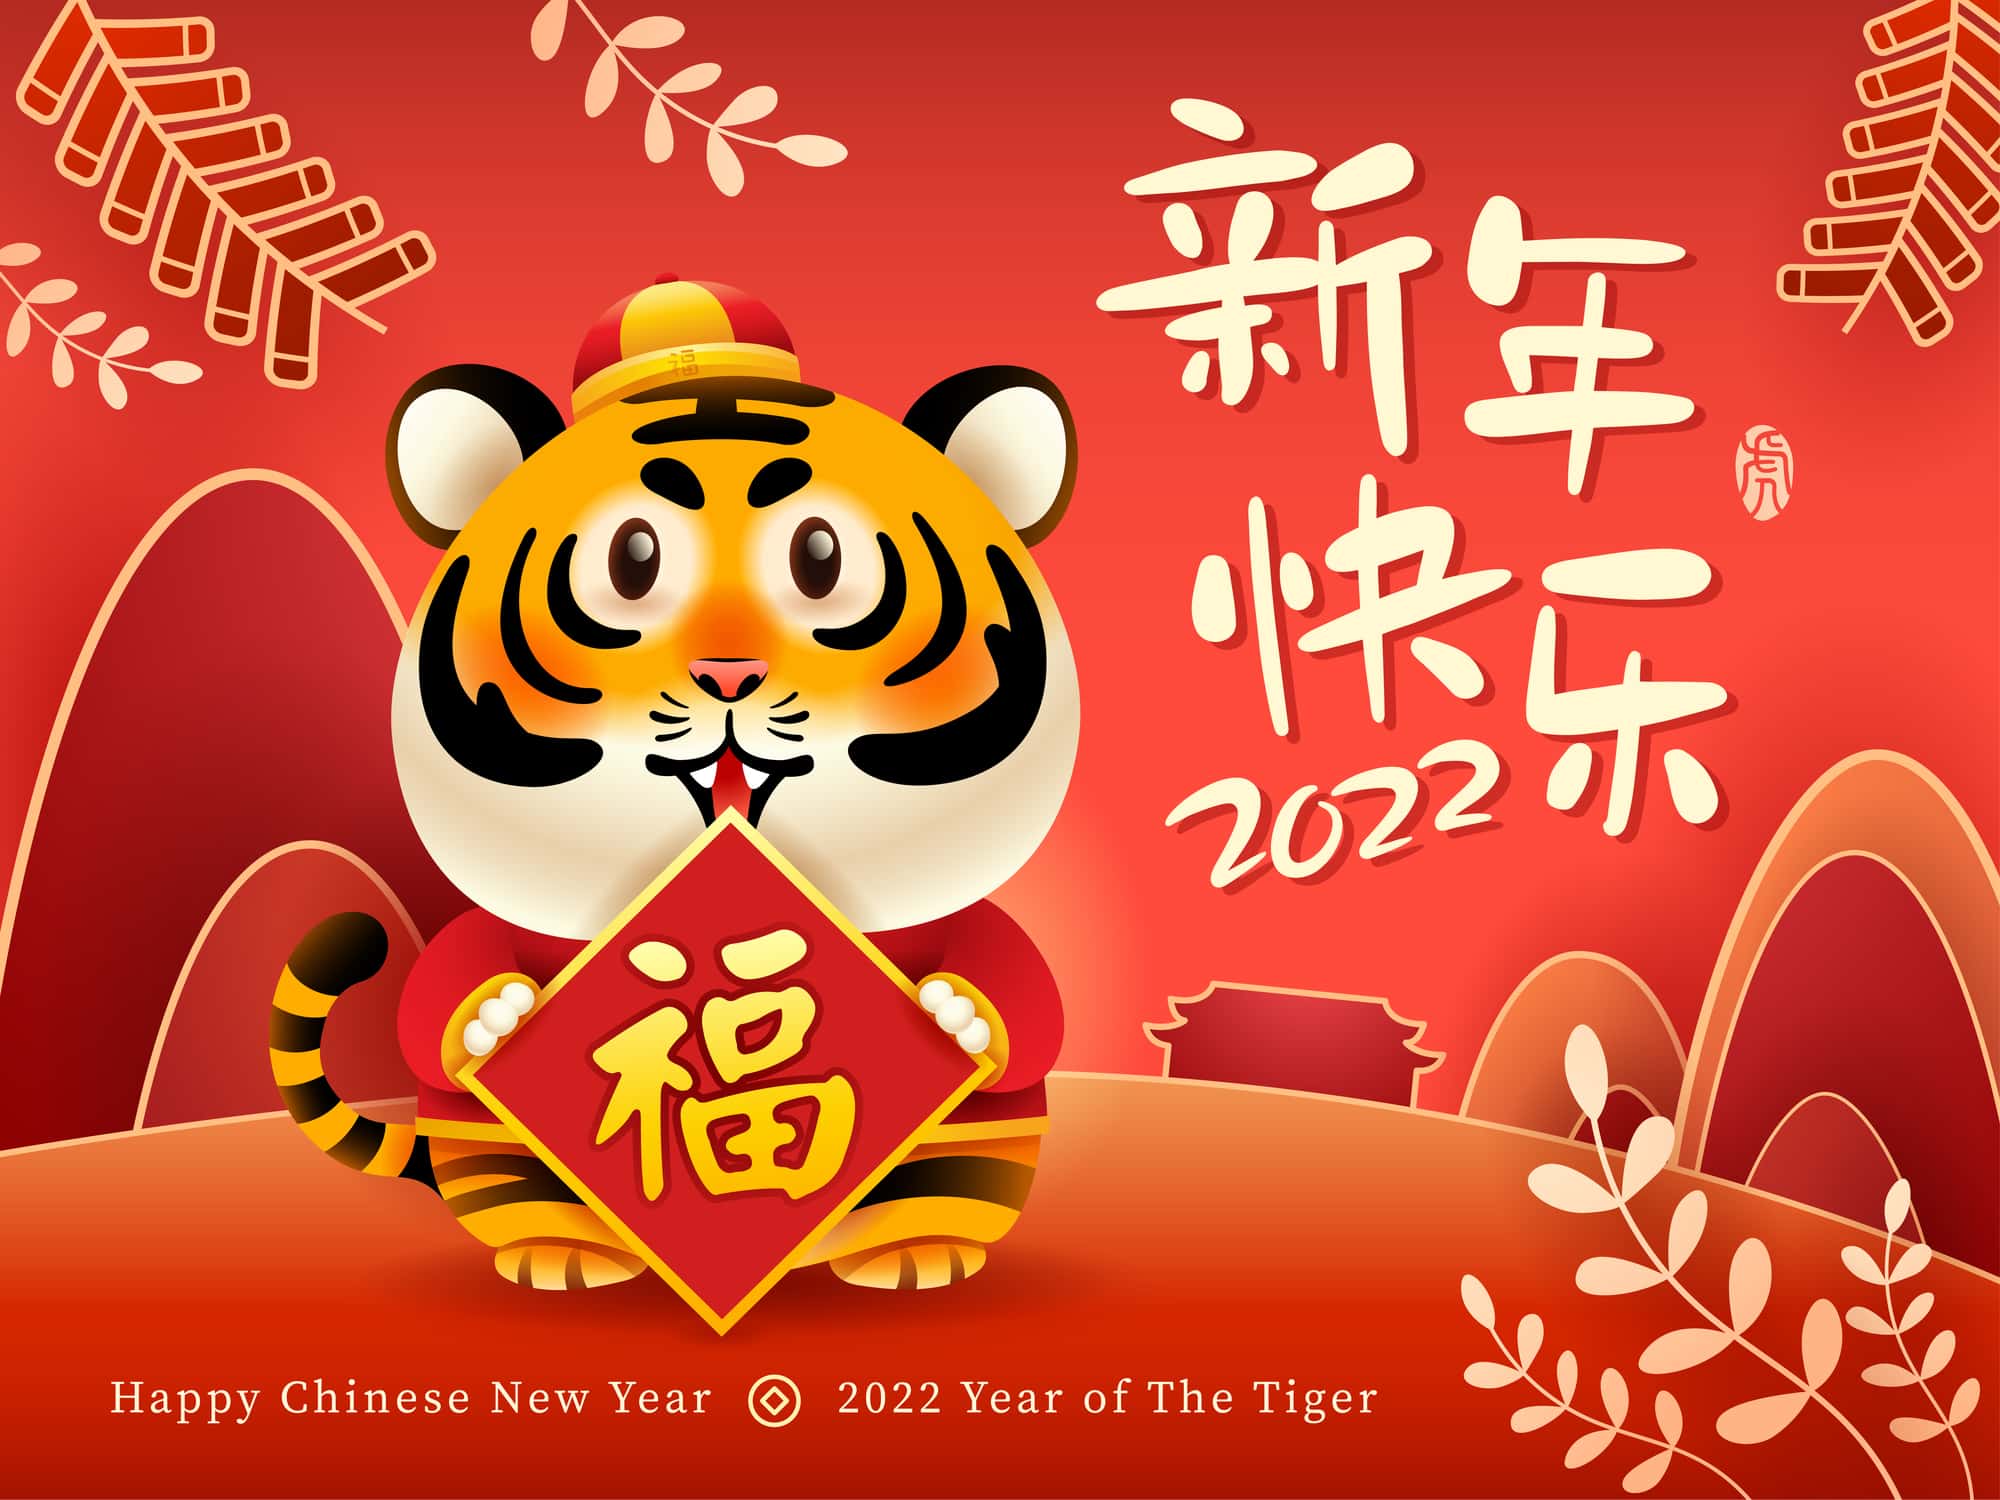 Cute tiger on oriental festive theme background. Happy Chinese New Year 2022. Year of the tiger.